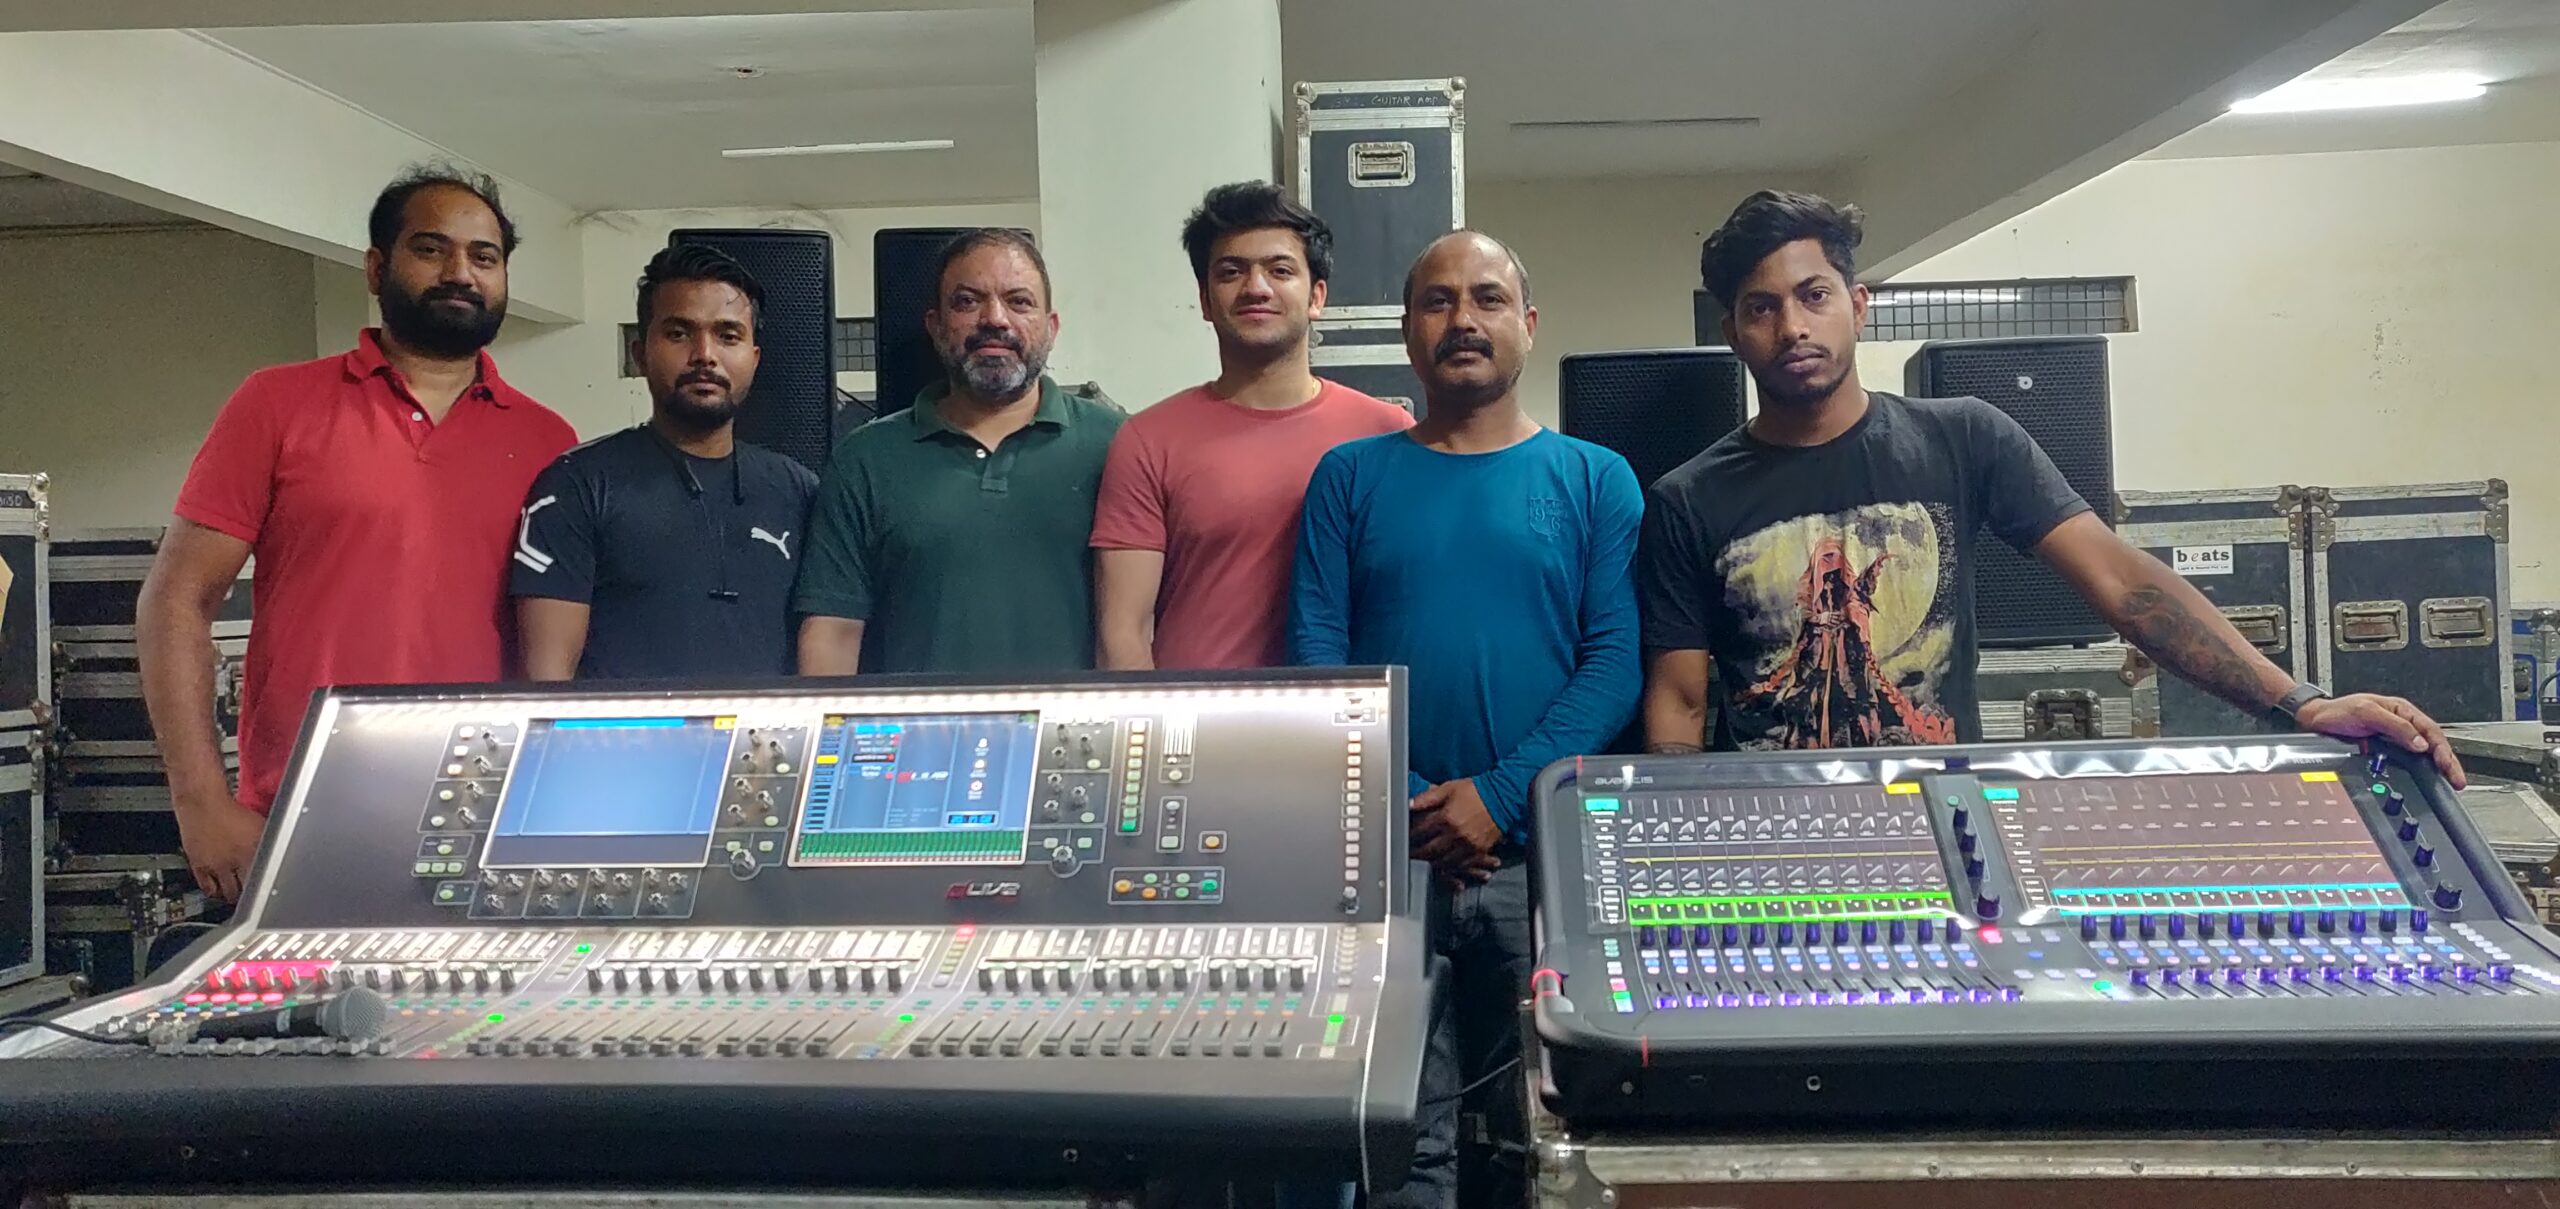 The Beats Light & Sound team with the dLive S7000 Surface and Avantis console.